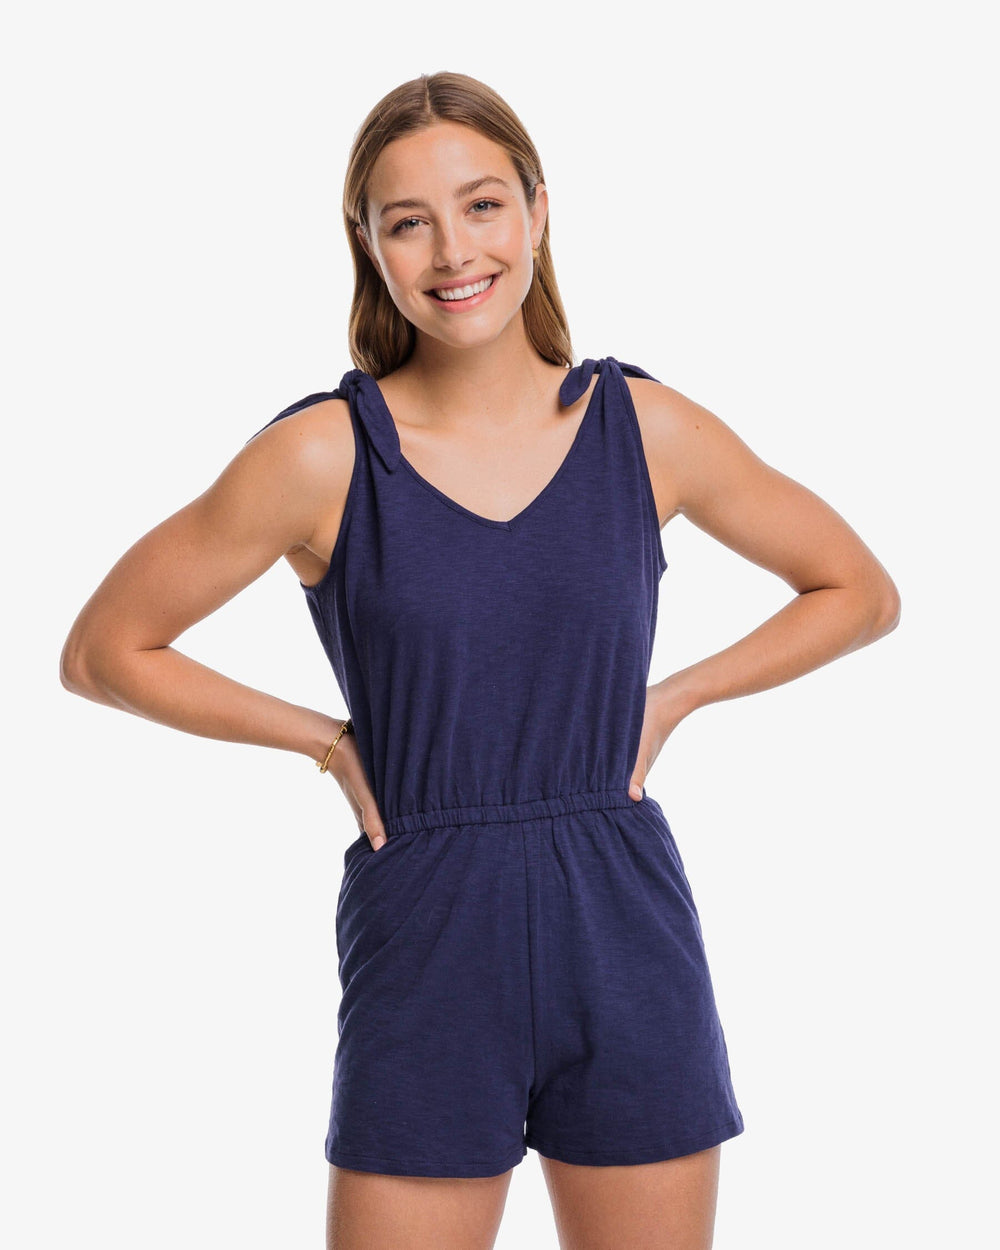 The front view of the Southern Tide Tillie Sun Farer Tie Shoulder Romper by Southern Tide - Nautical Navy